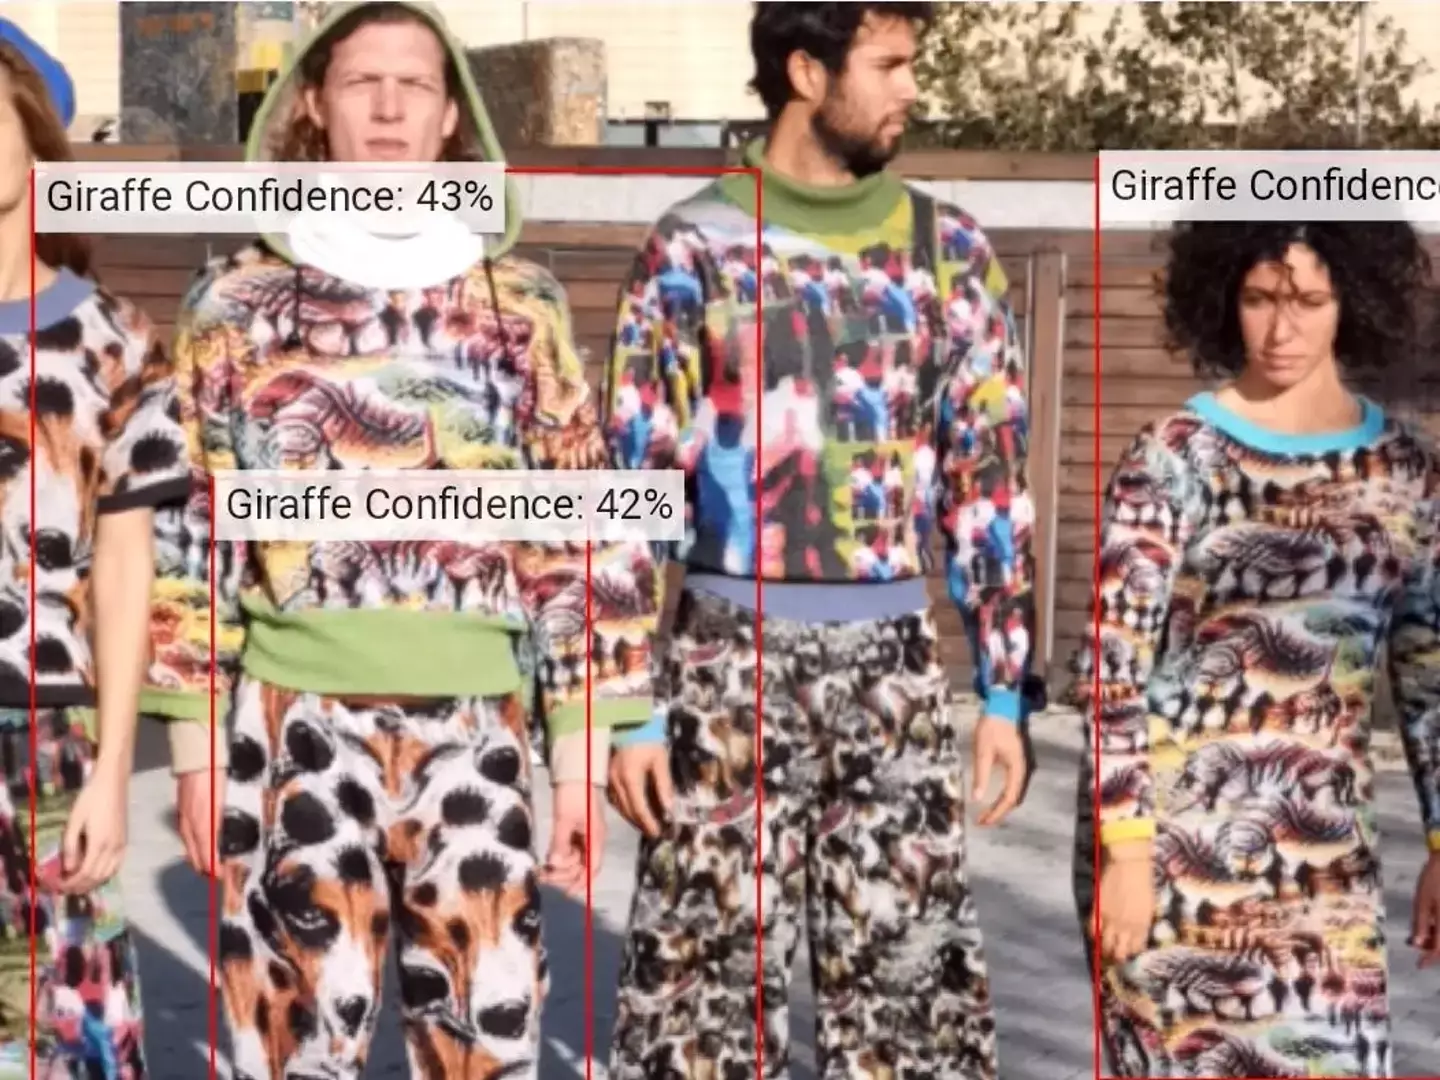 The sweater has tricked facial-recognition technology into thinking wearers are animals.